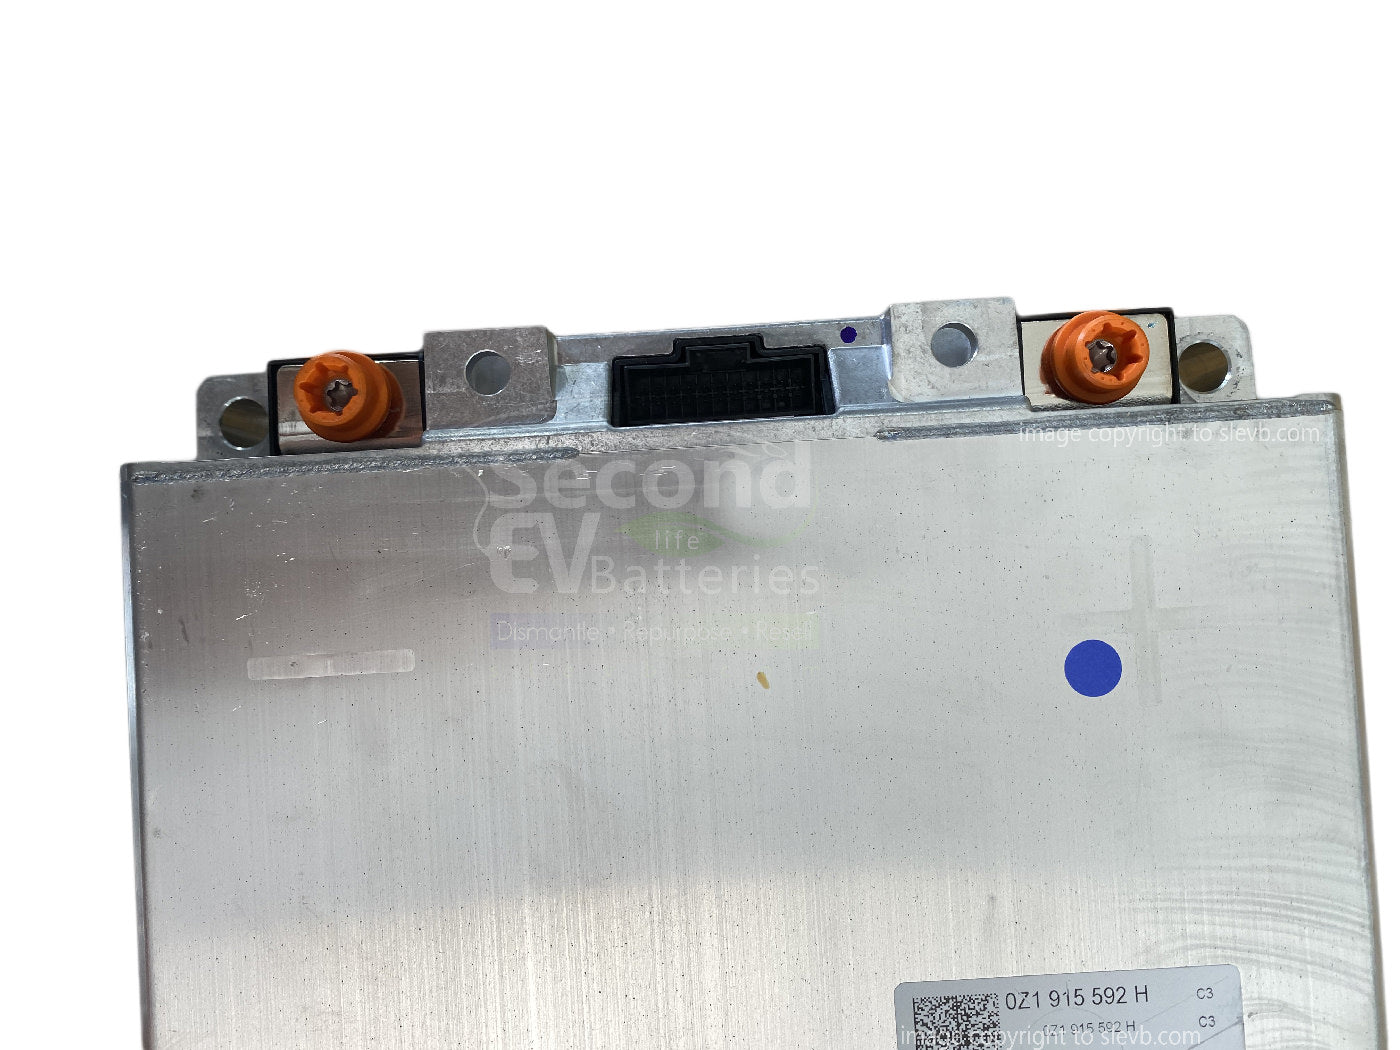 VW ID Module 8S TOP- Second Life Battery